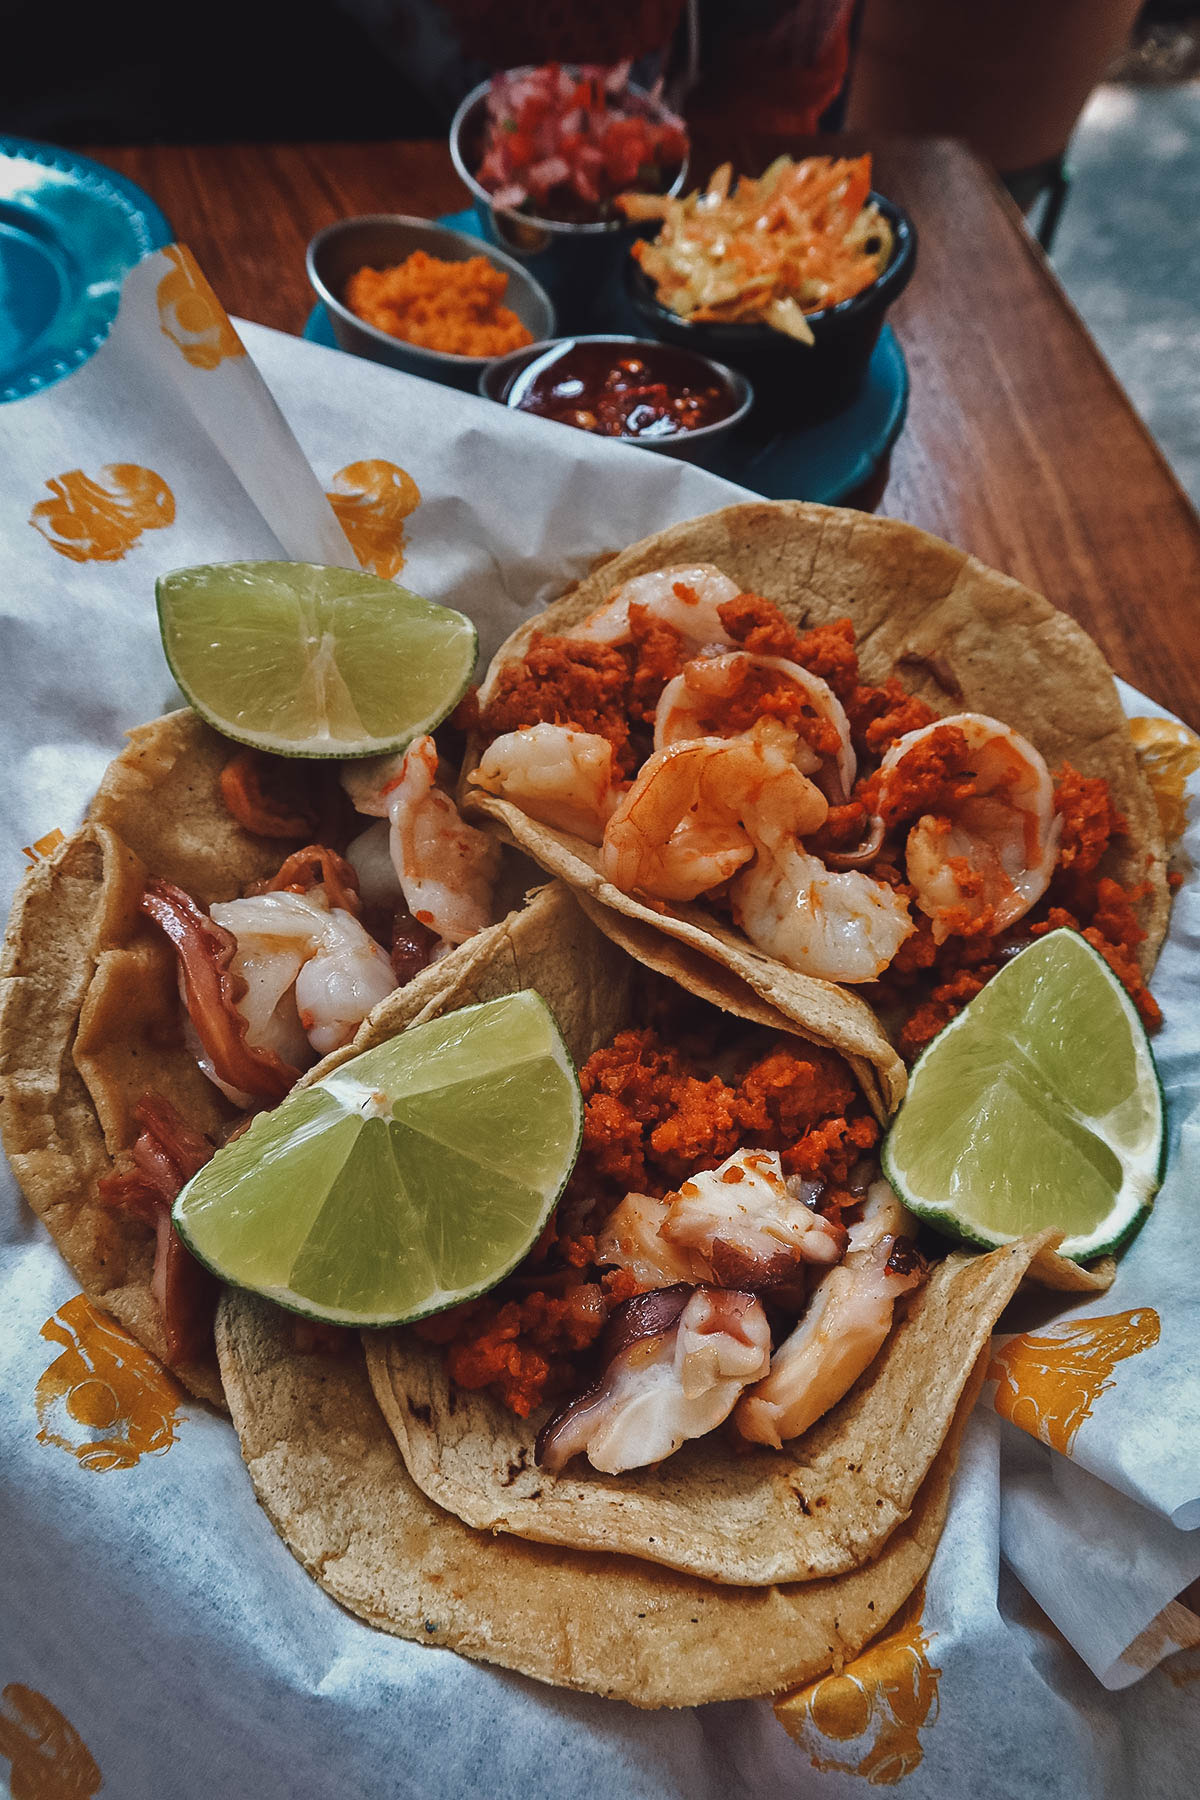 35 Mexico City Tacos You'll Want to Fly For | Will Fly for Food